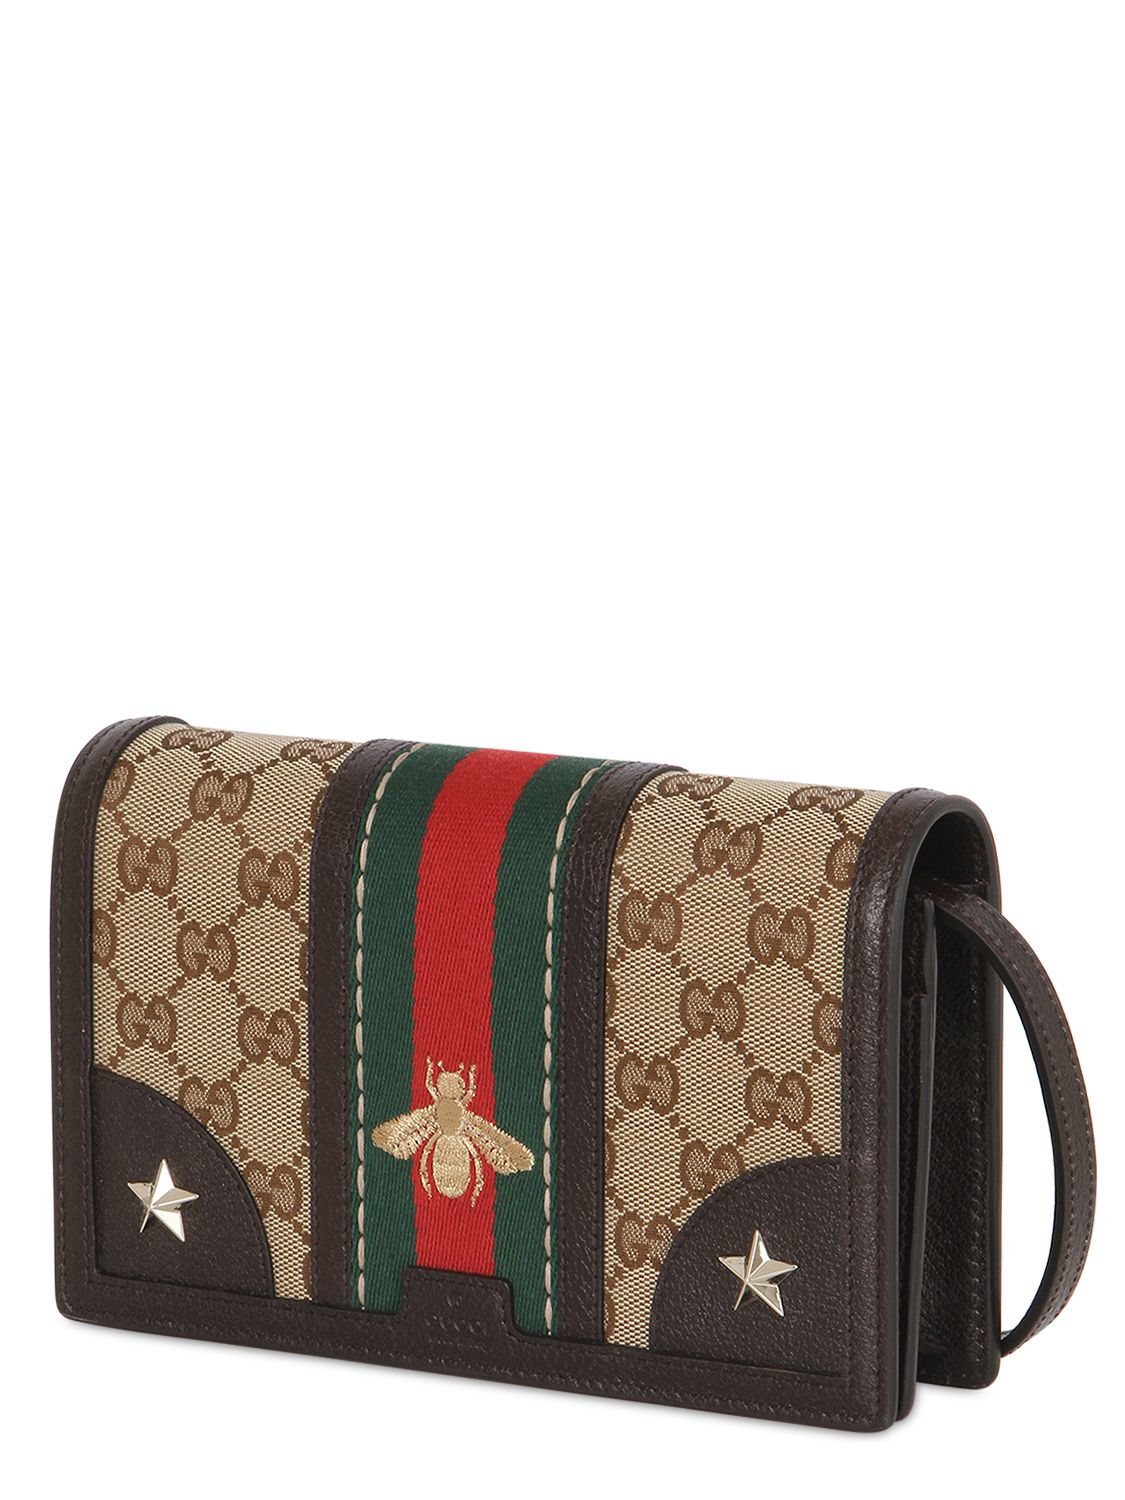 Gucci GG Supreme Bee-Embroidered Canvas Bag in Brown | Lyst